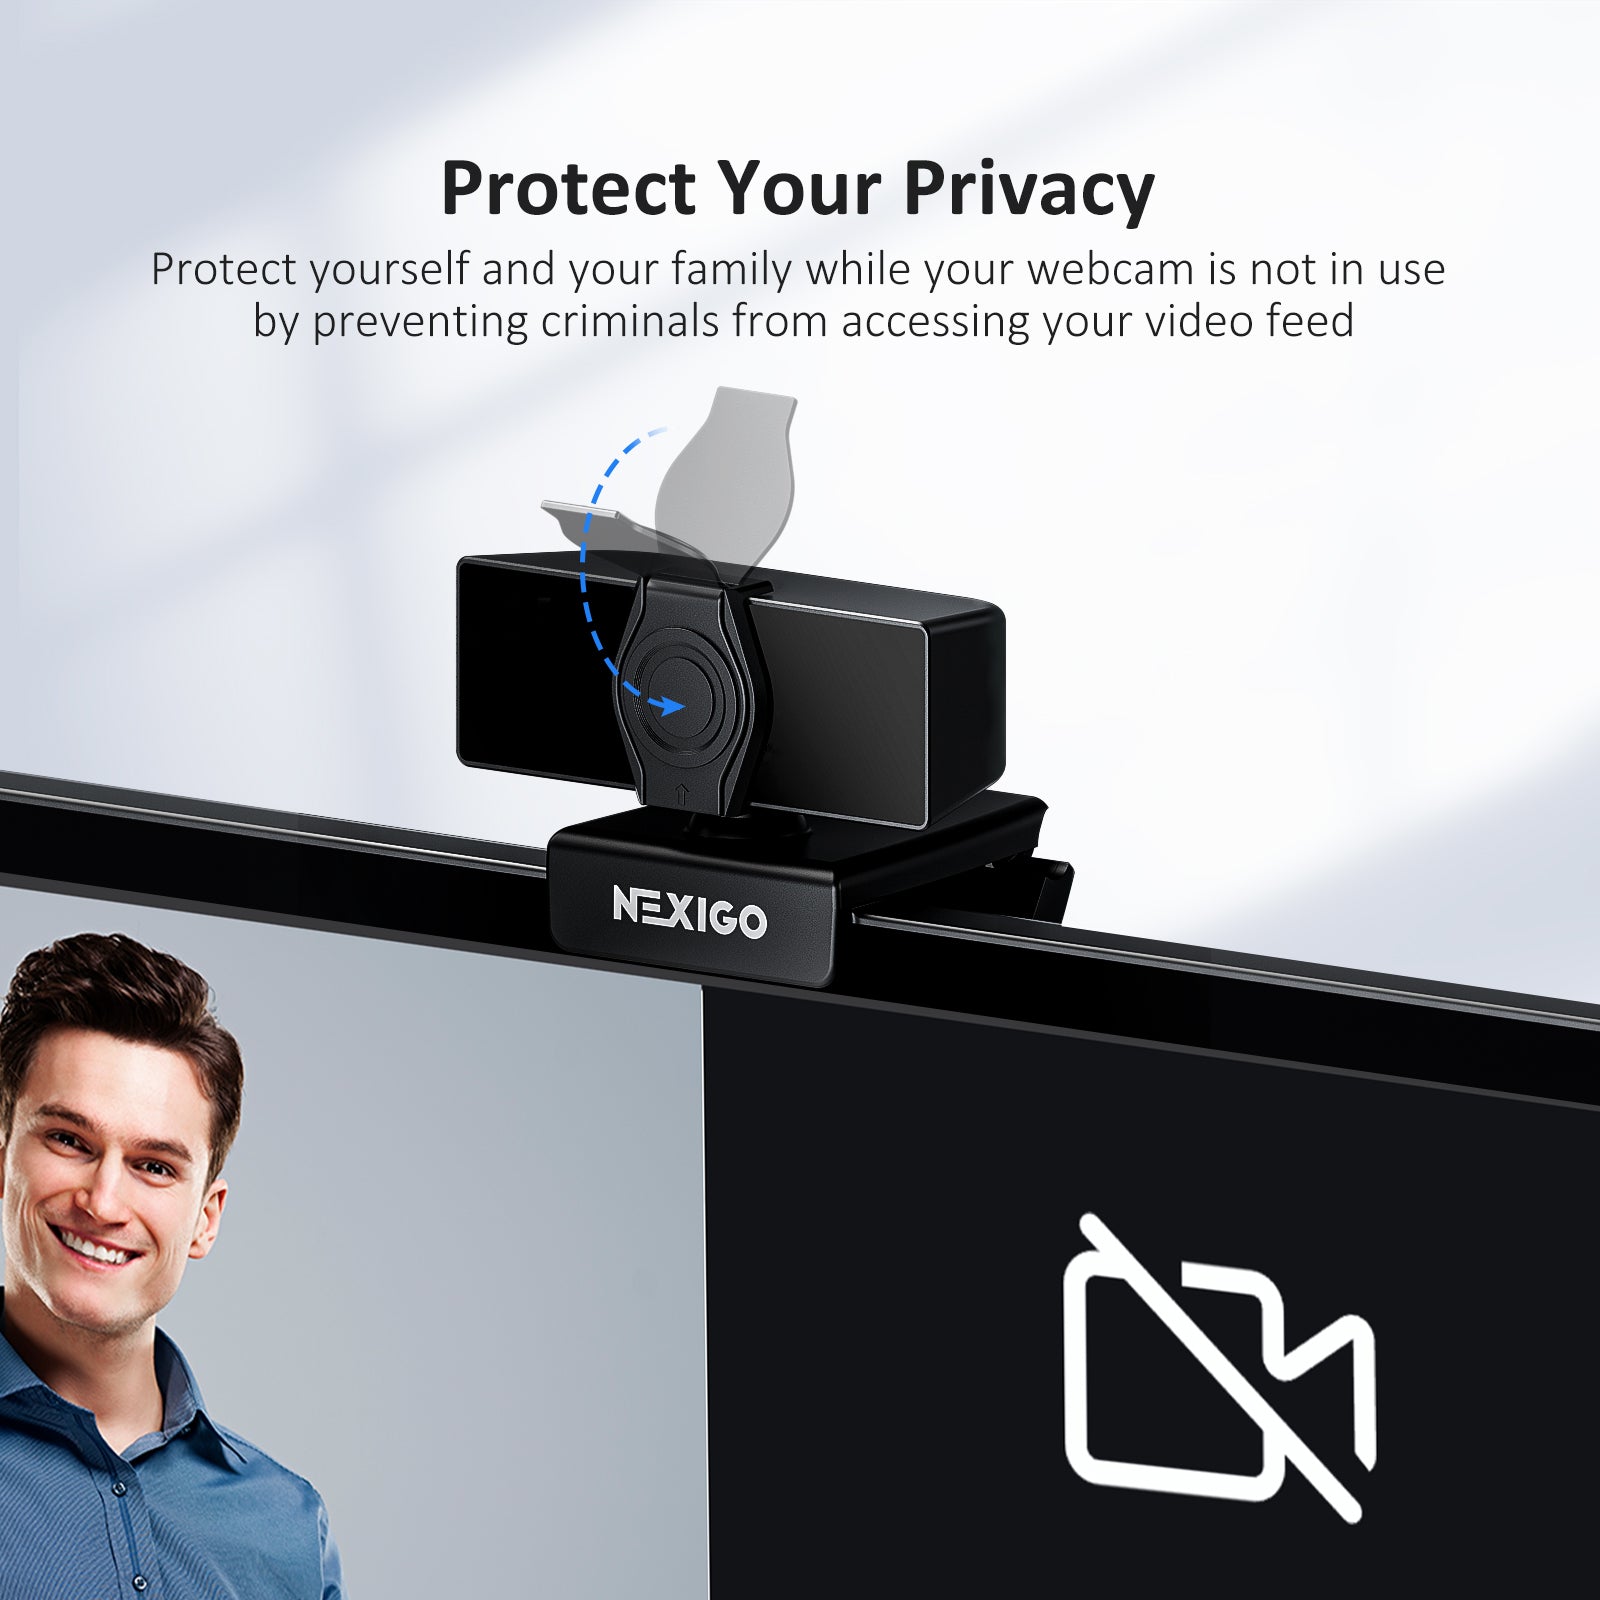 N660 Pro is equipped with a privacy cover, which can be closed to protect privacy during videos.